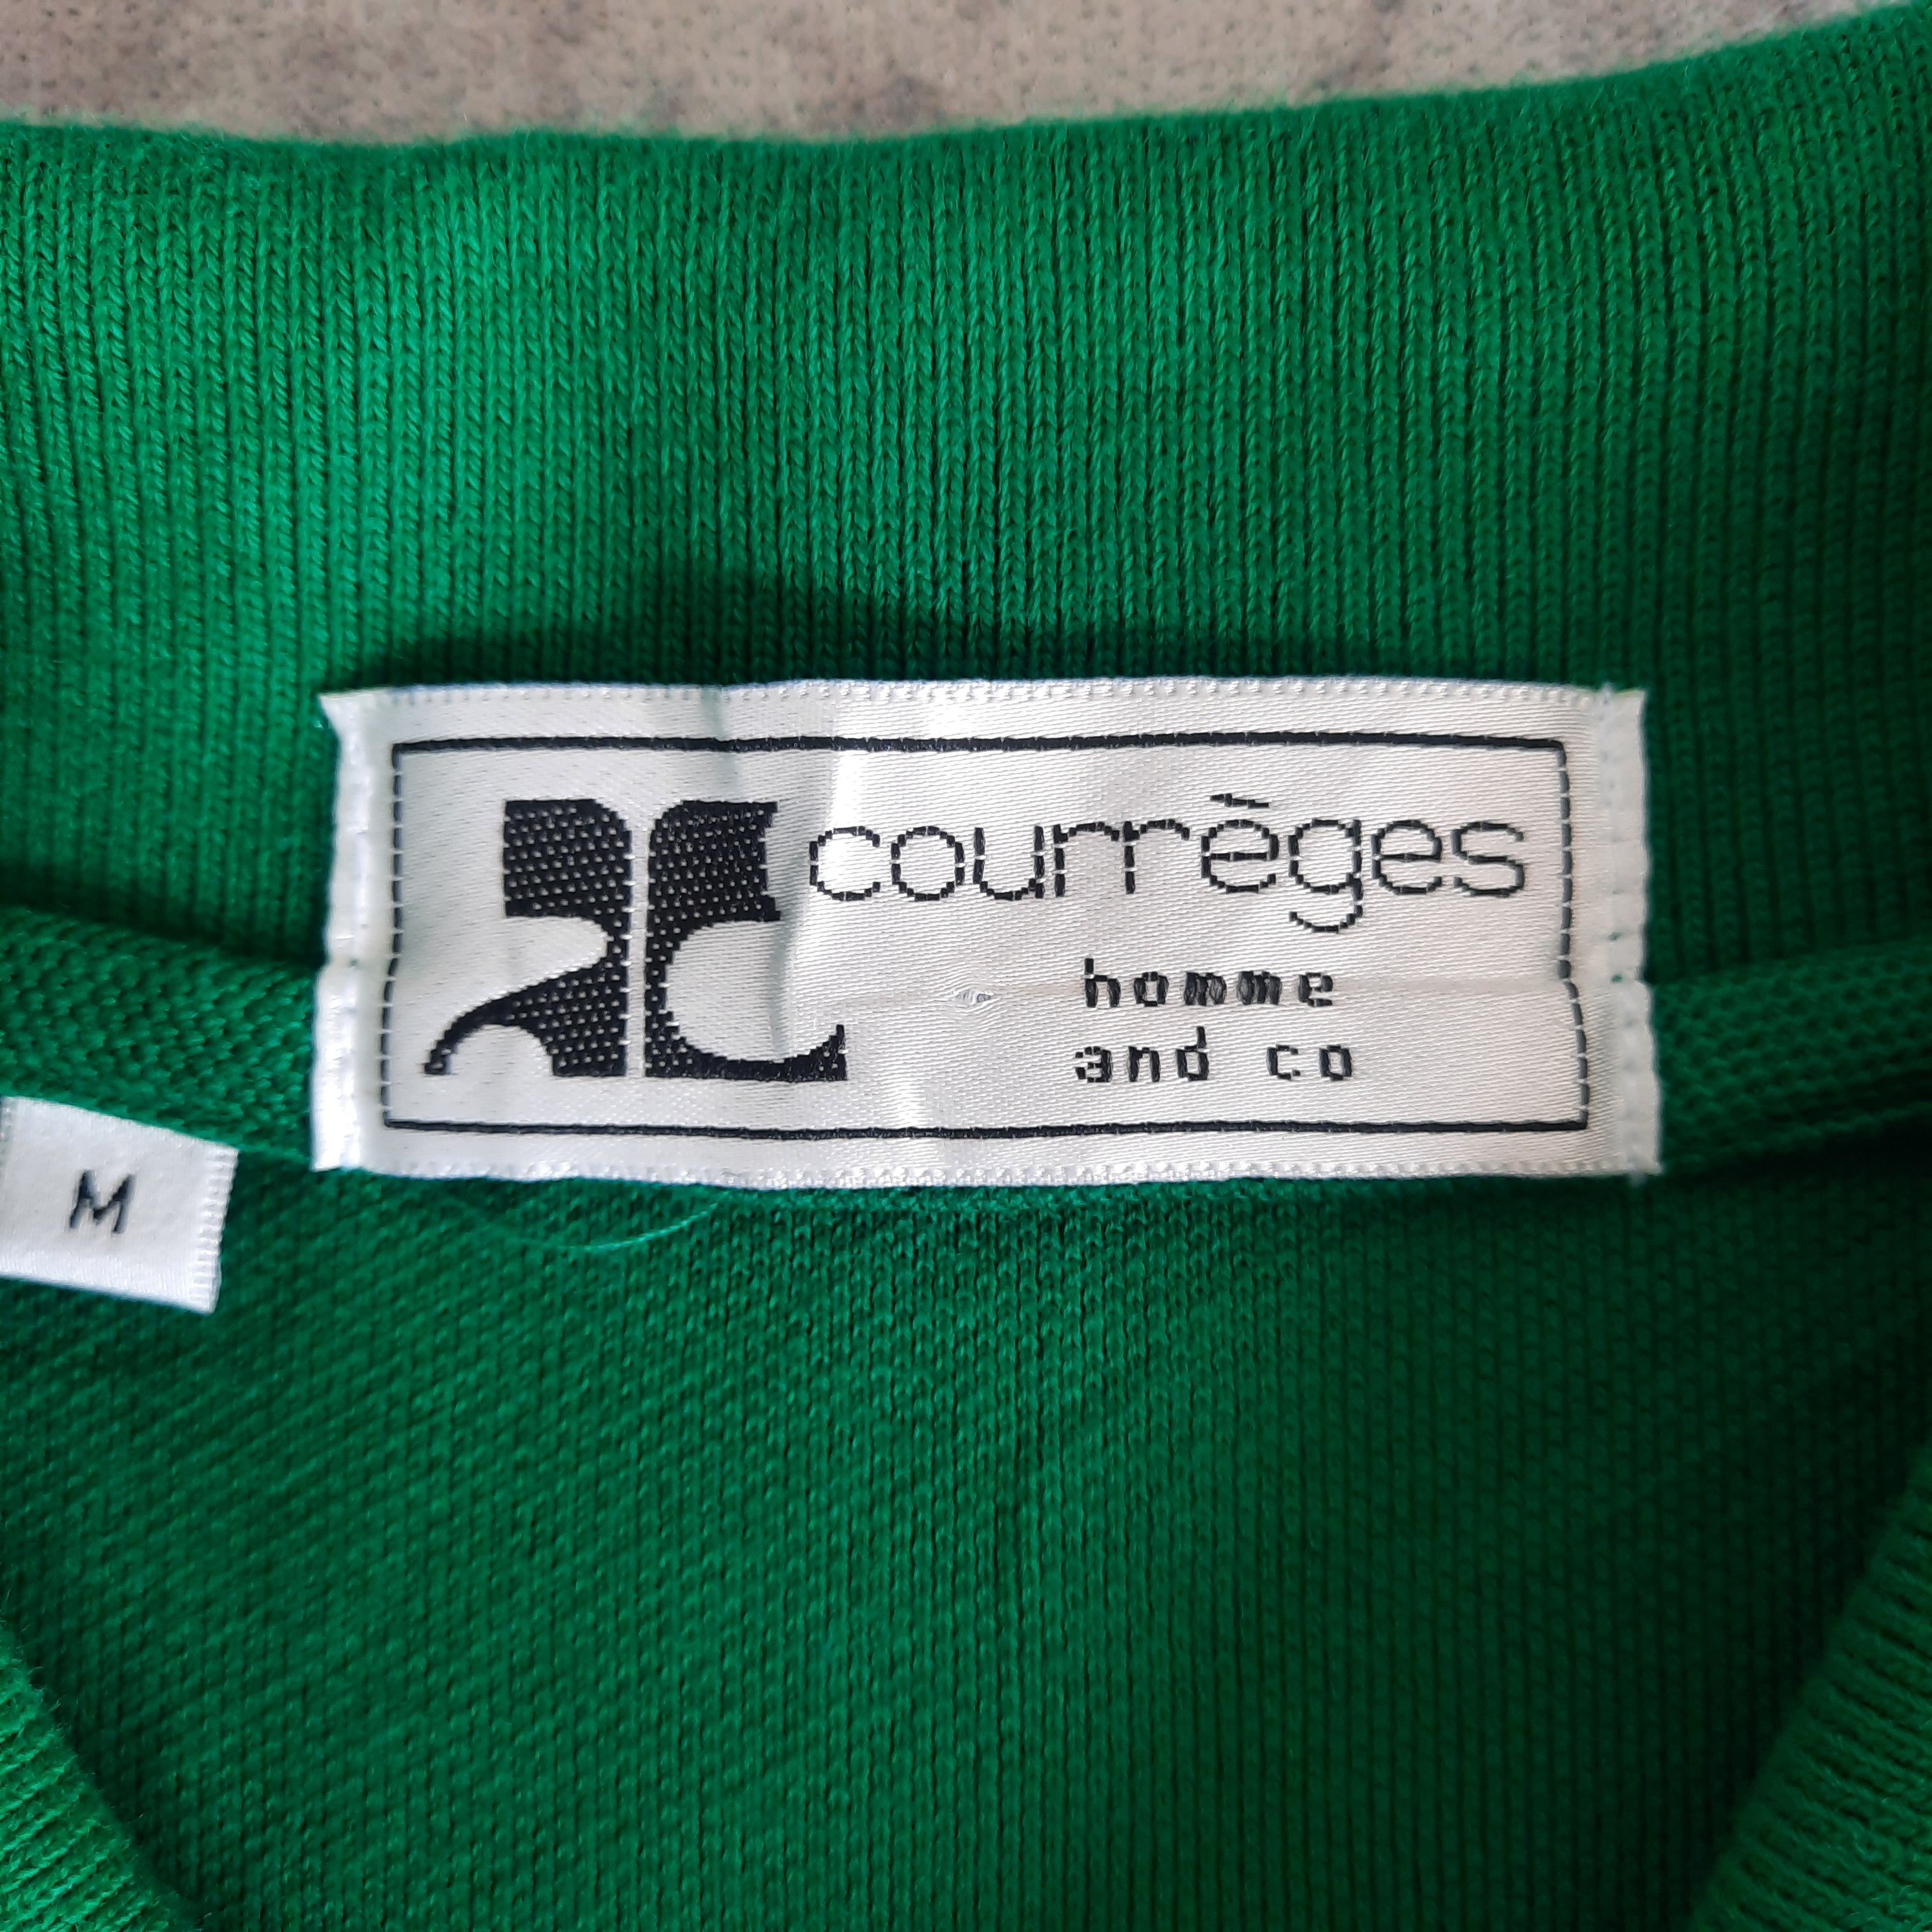 Archival Clothing 🔥Vintage courreges homme and co embroidery logo polo shirt Size US M / EU 48-50 / 2 - 3 Thumbnail